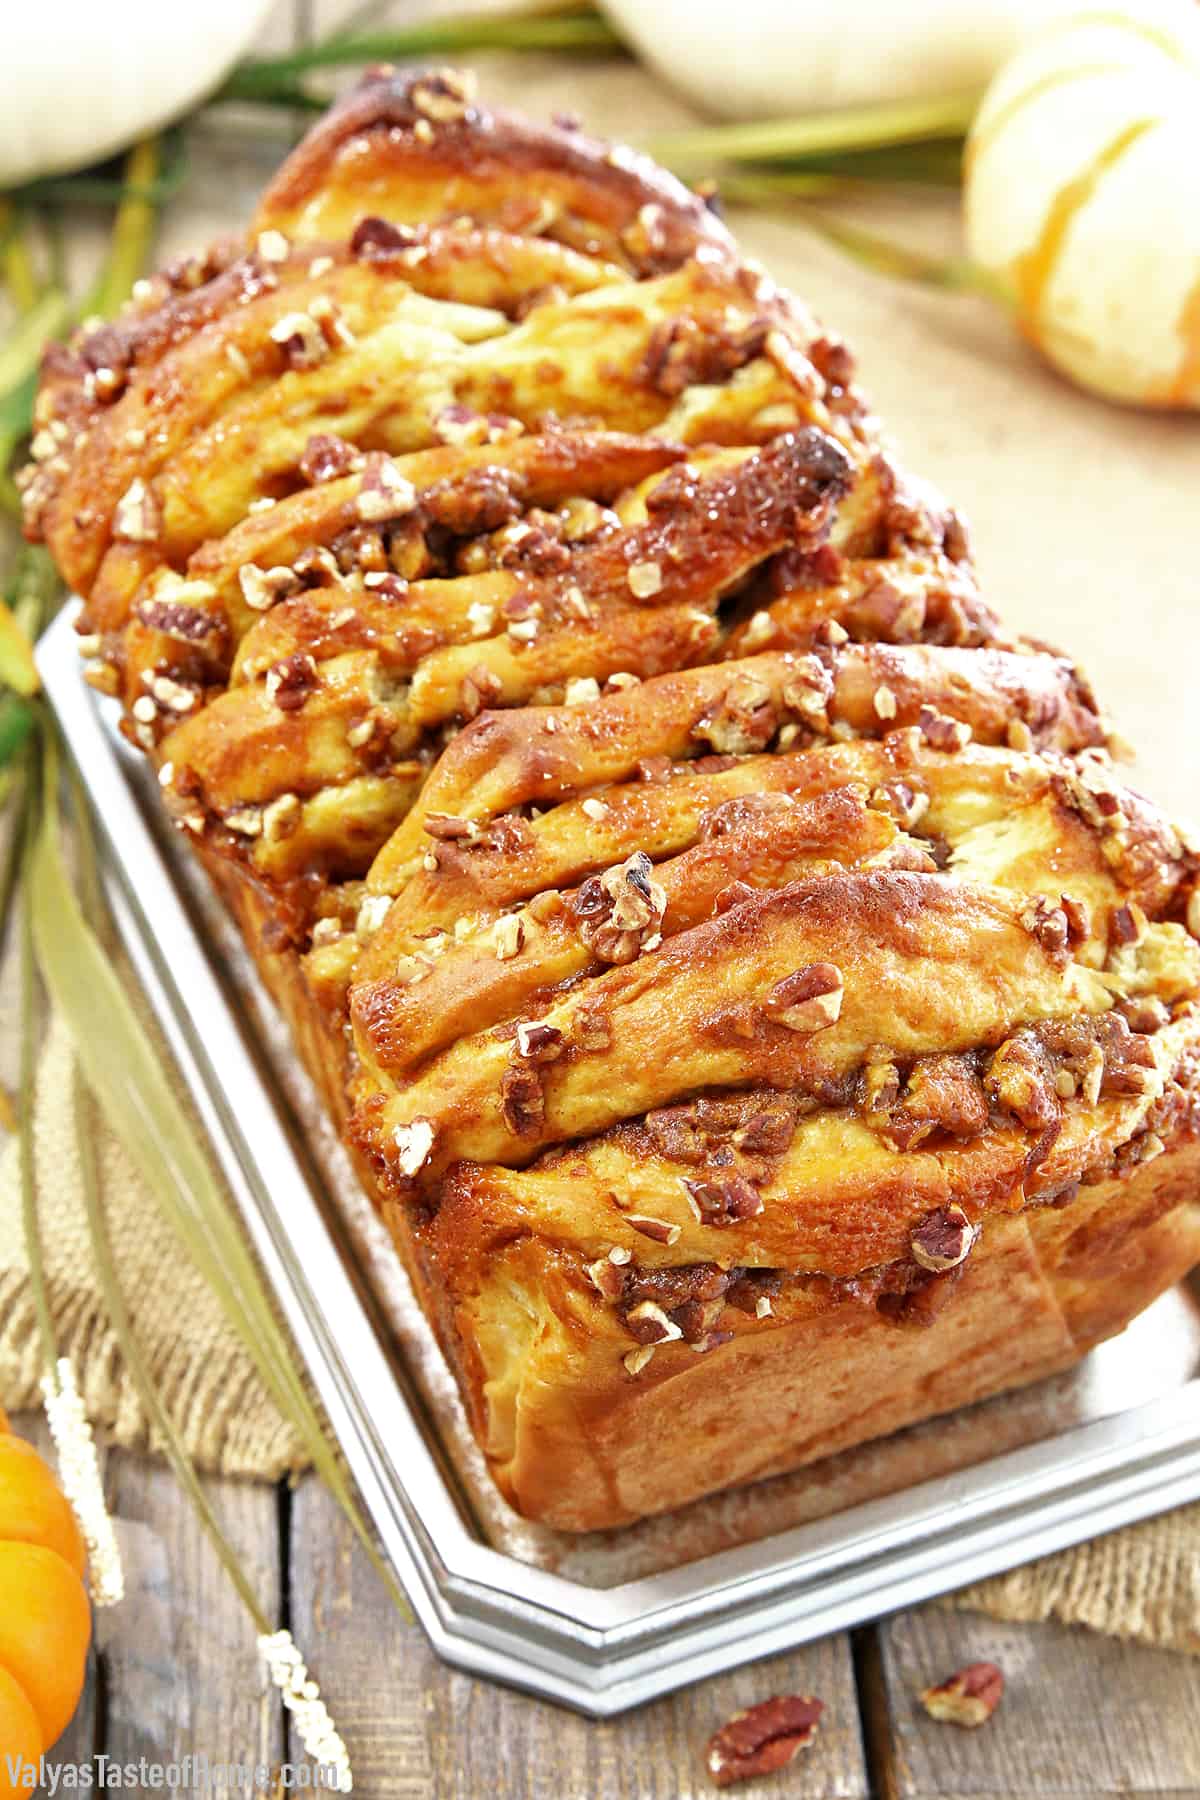 The name of this treat, Pumpkin Pull-Apart Bread with Pecans and Caramel, pretty much covers it! Filled with wonderful flavors we all love about Fall, it’s sure to satisfy your sweet cravings. 